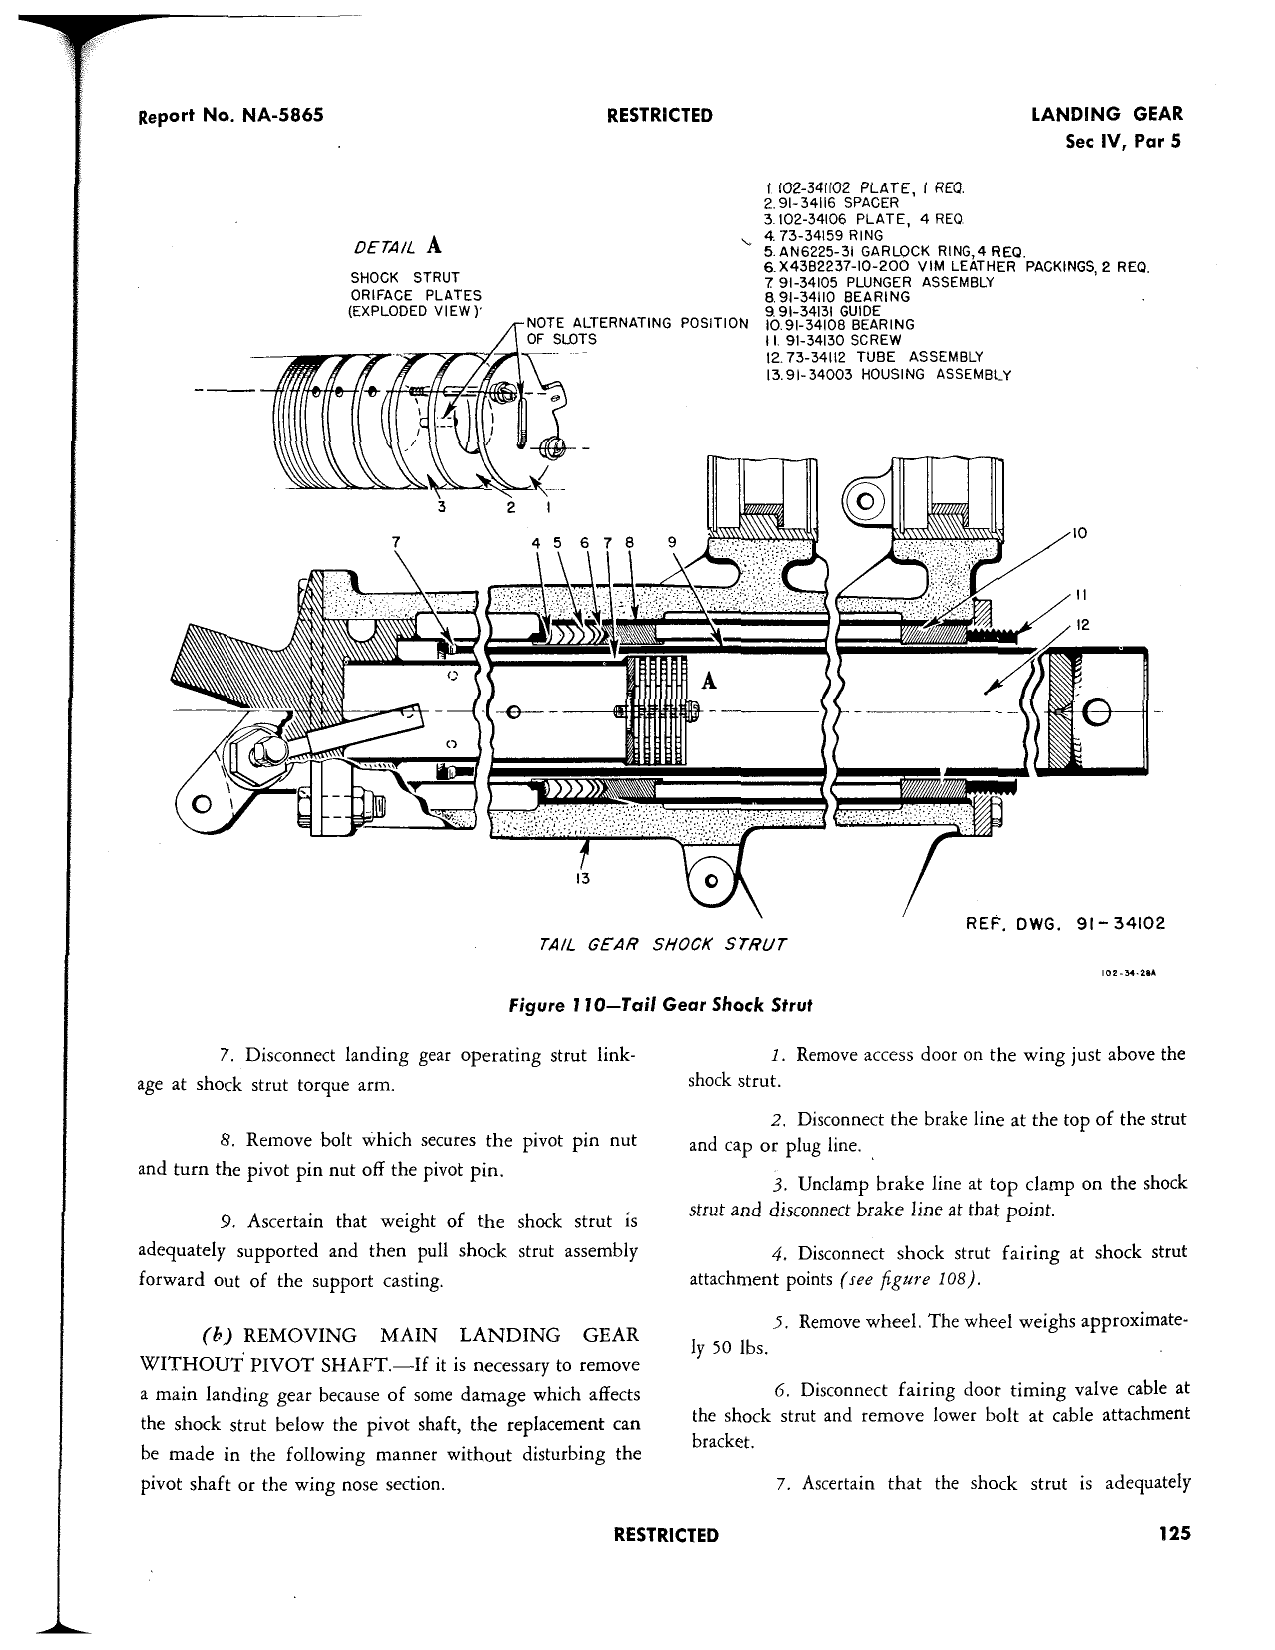 Sample page 129 from AirCorps Library document: Shipment & Erection Manual - P-51D Airplanes